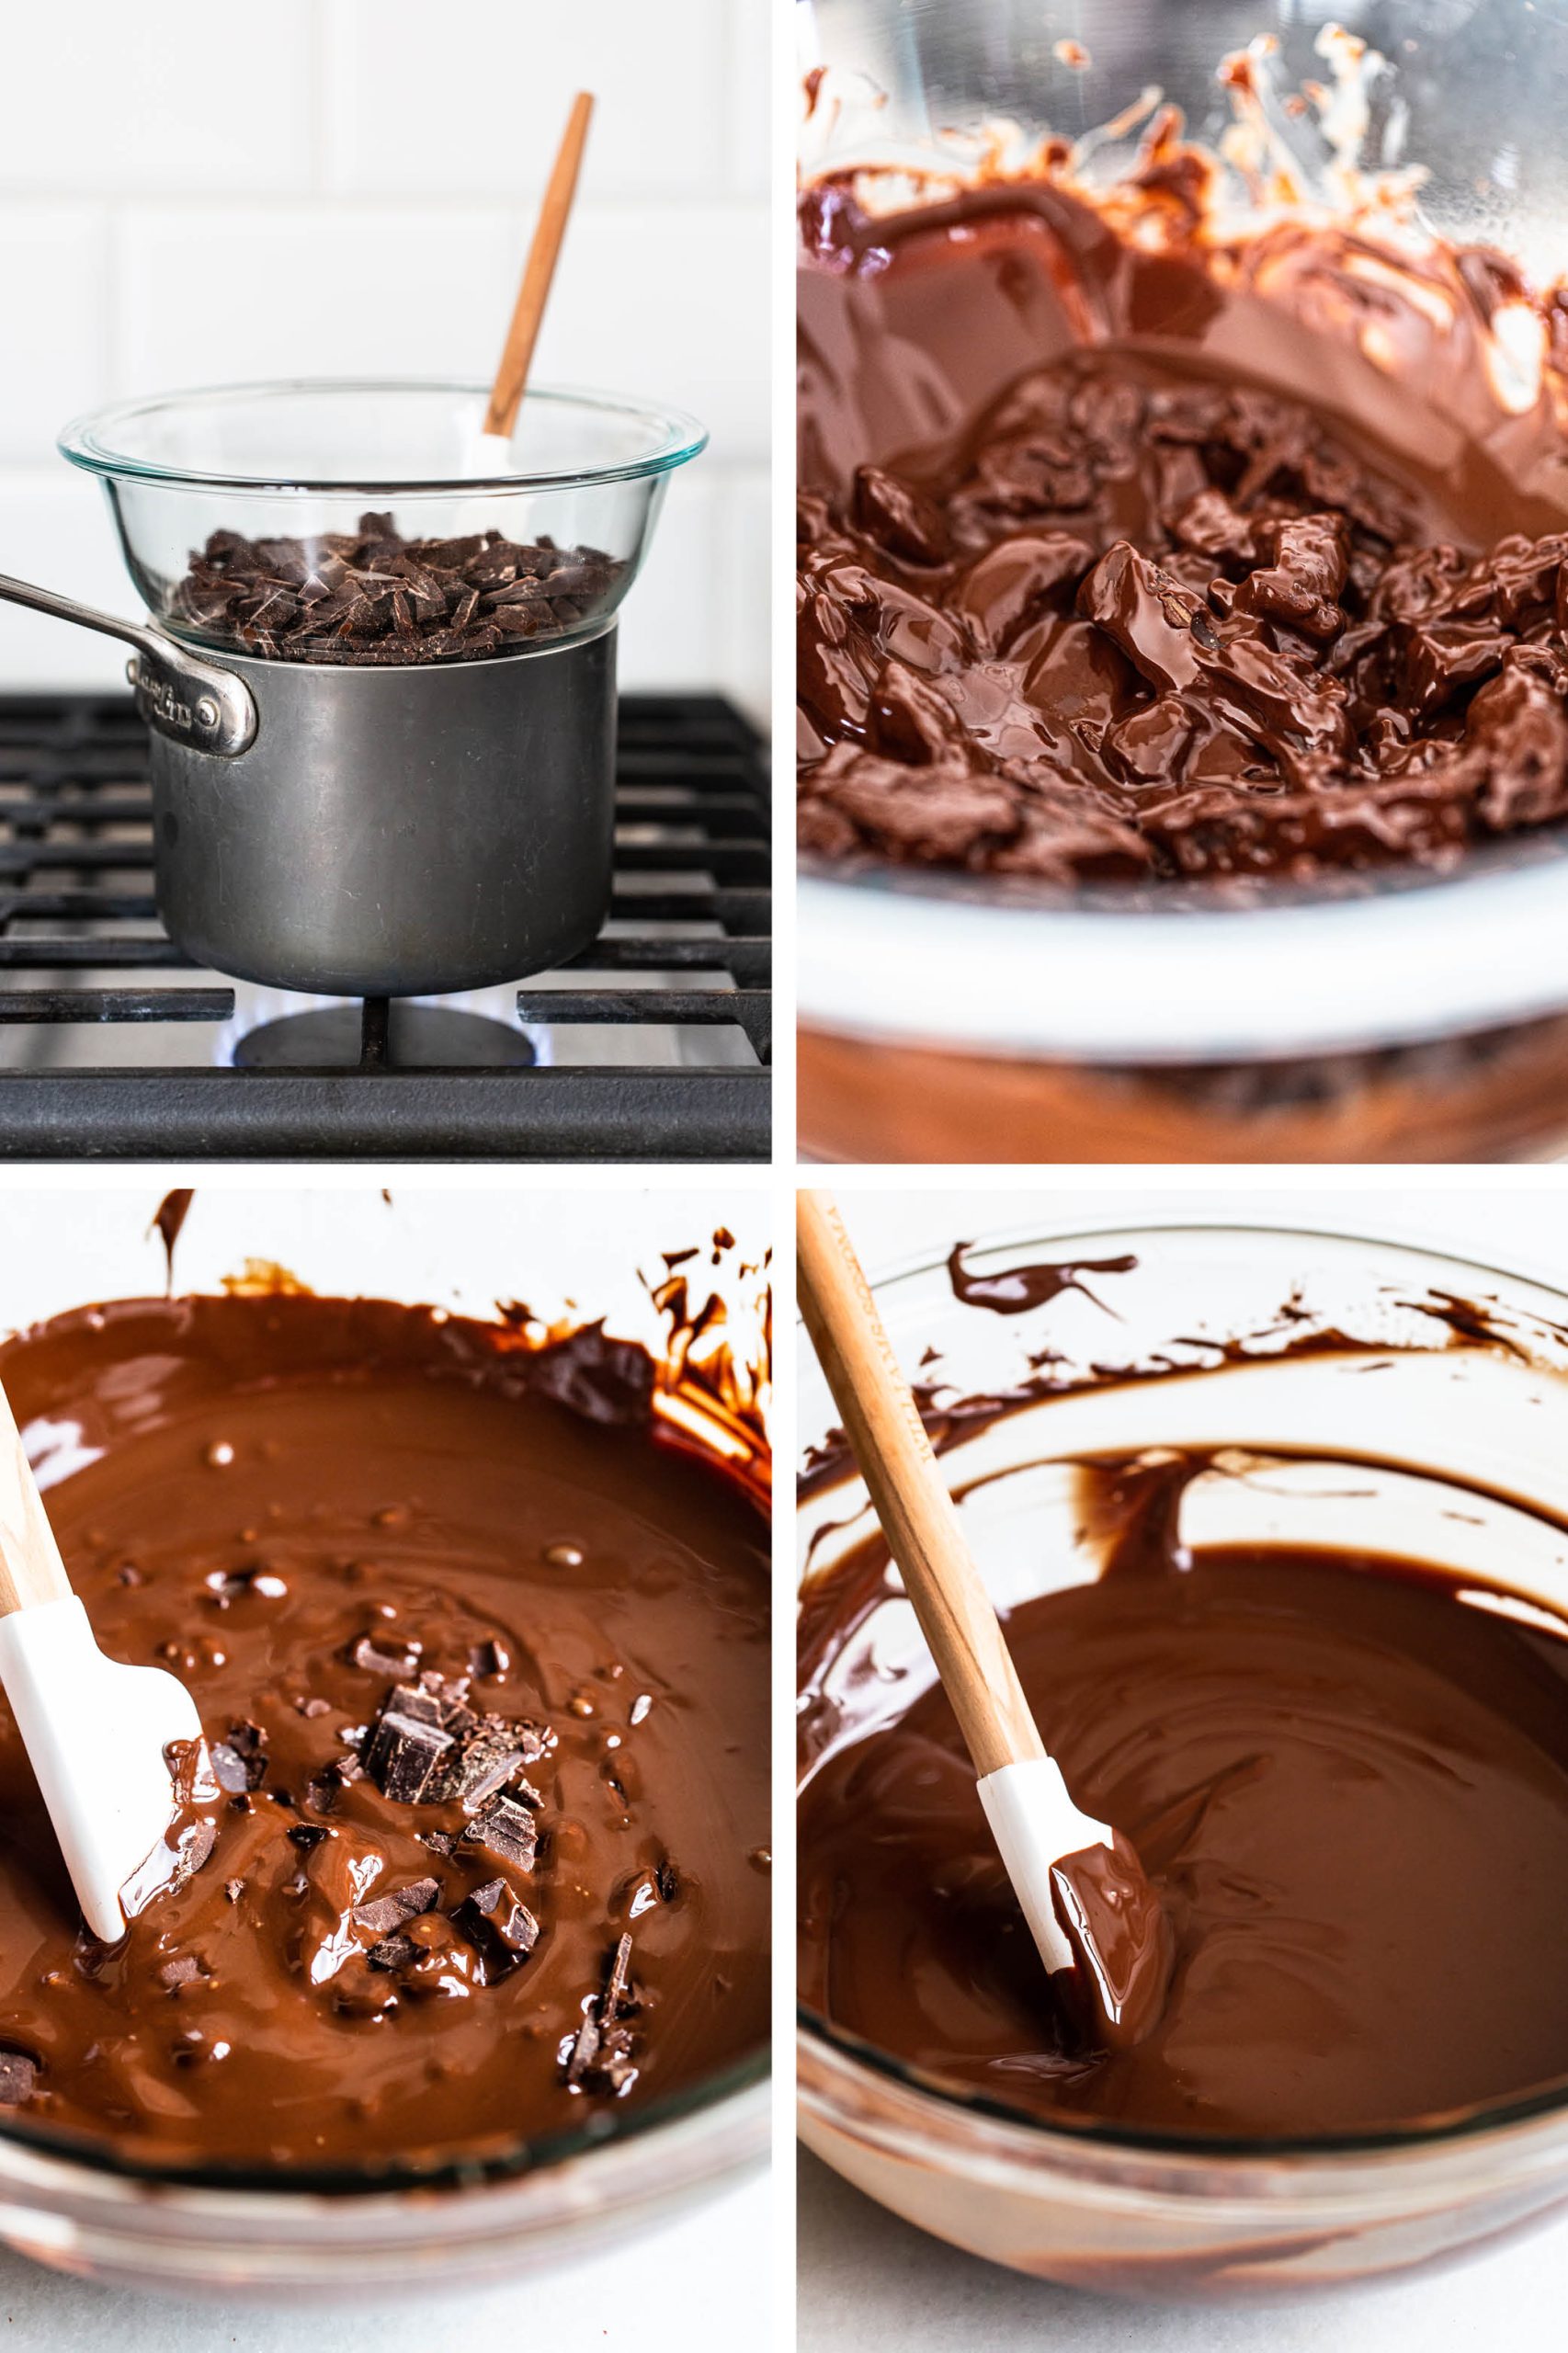 step-by-step how to temper chocolate